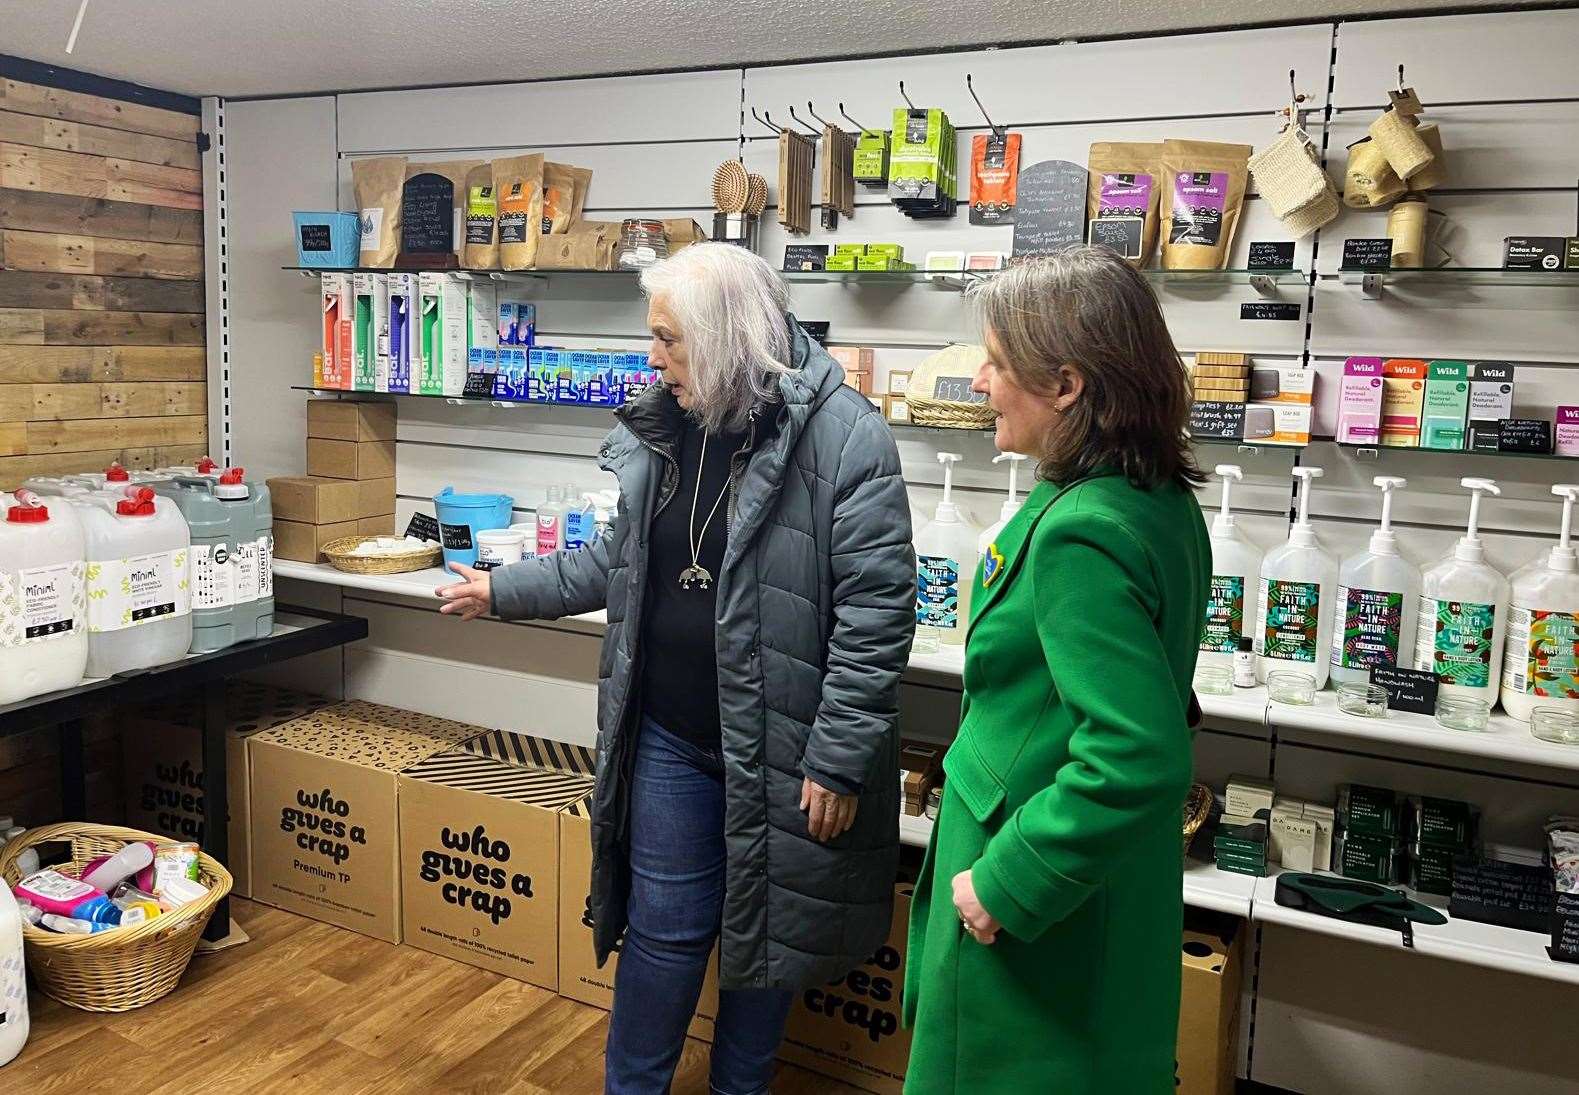 Helen Allan (left) showing Maree Todd the Socially Growing refill shop, one of Thurso Community Development Trust's projects, earlier this year.